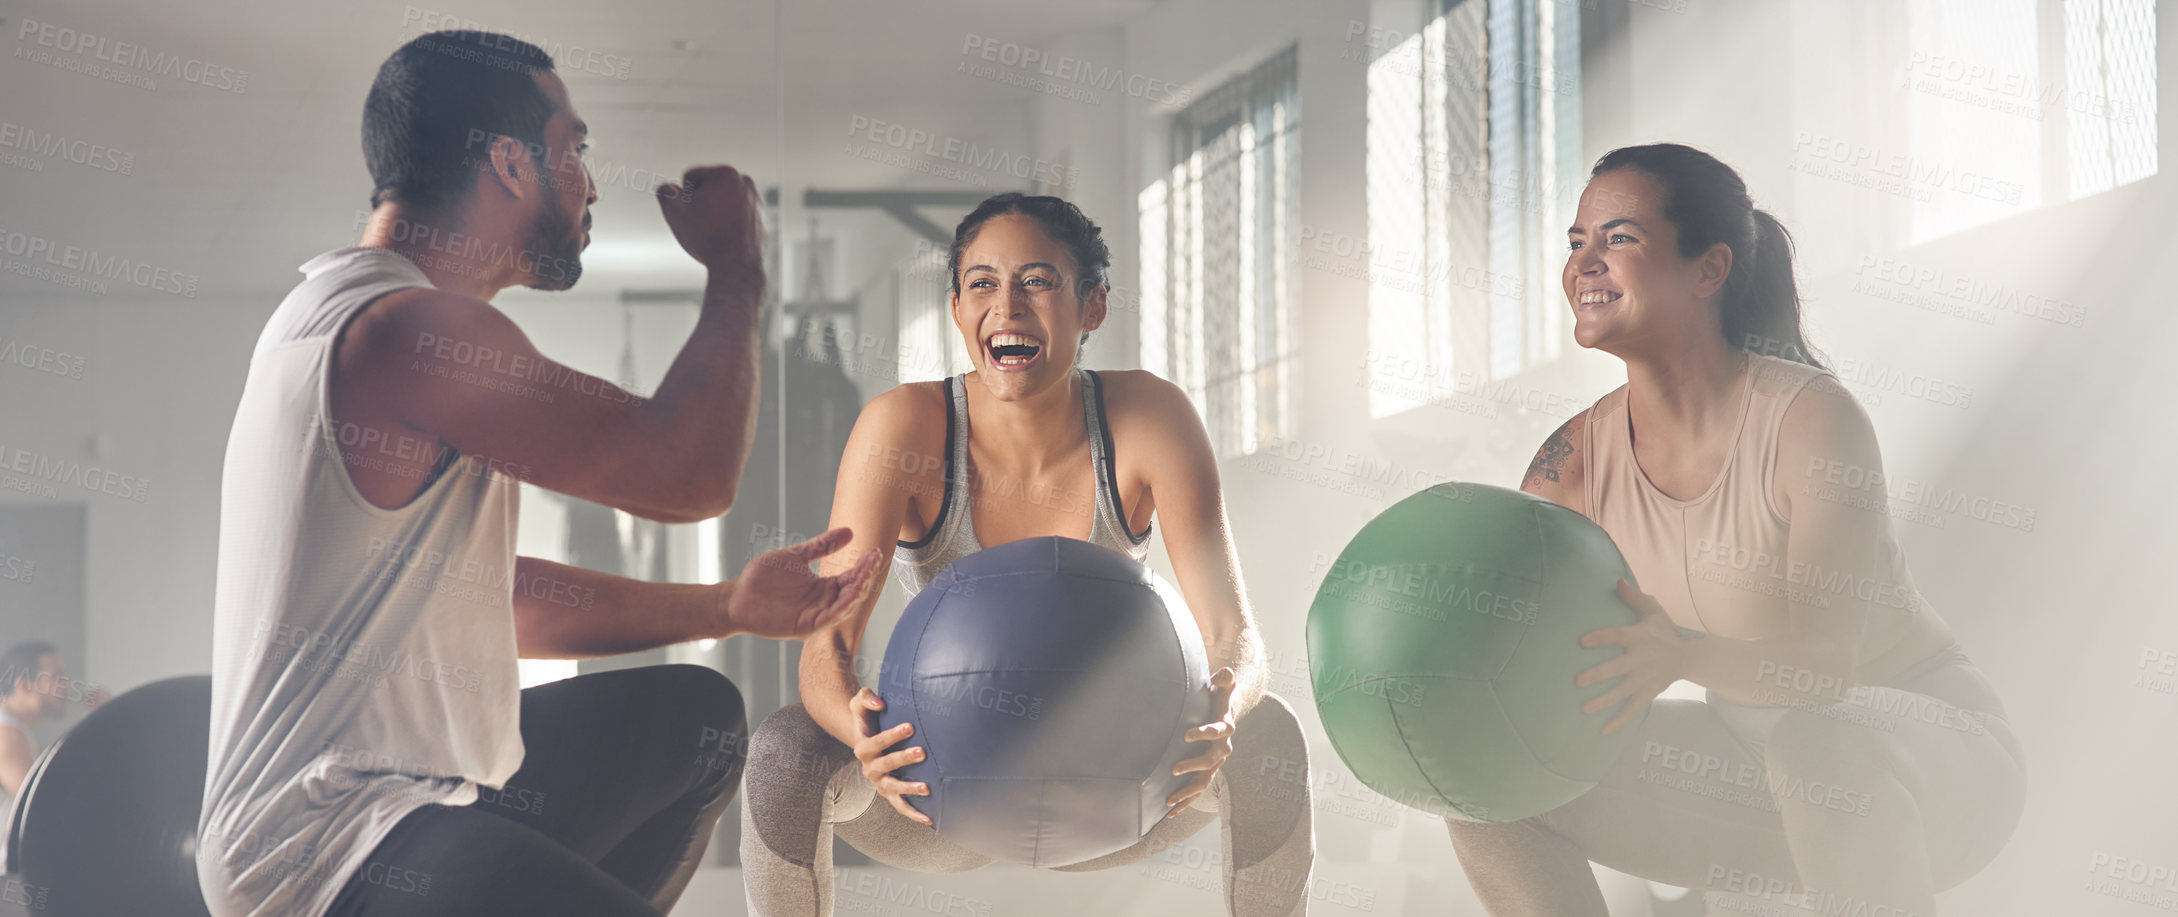 Buy stock photo Shot of two women using fitness balls while working out with their trainer